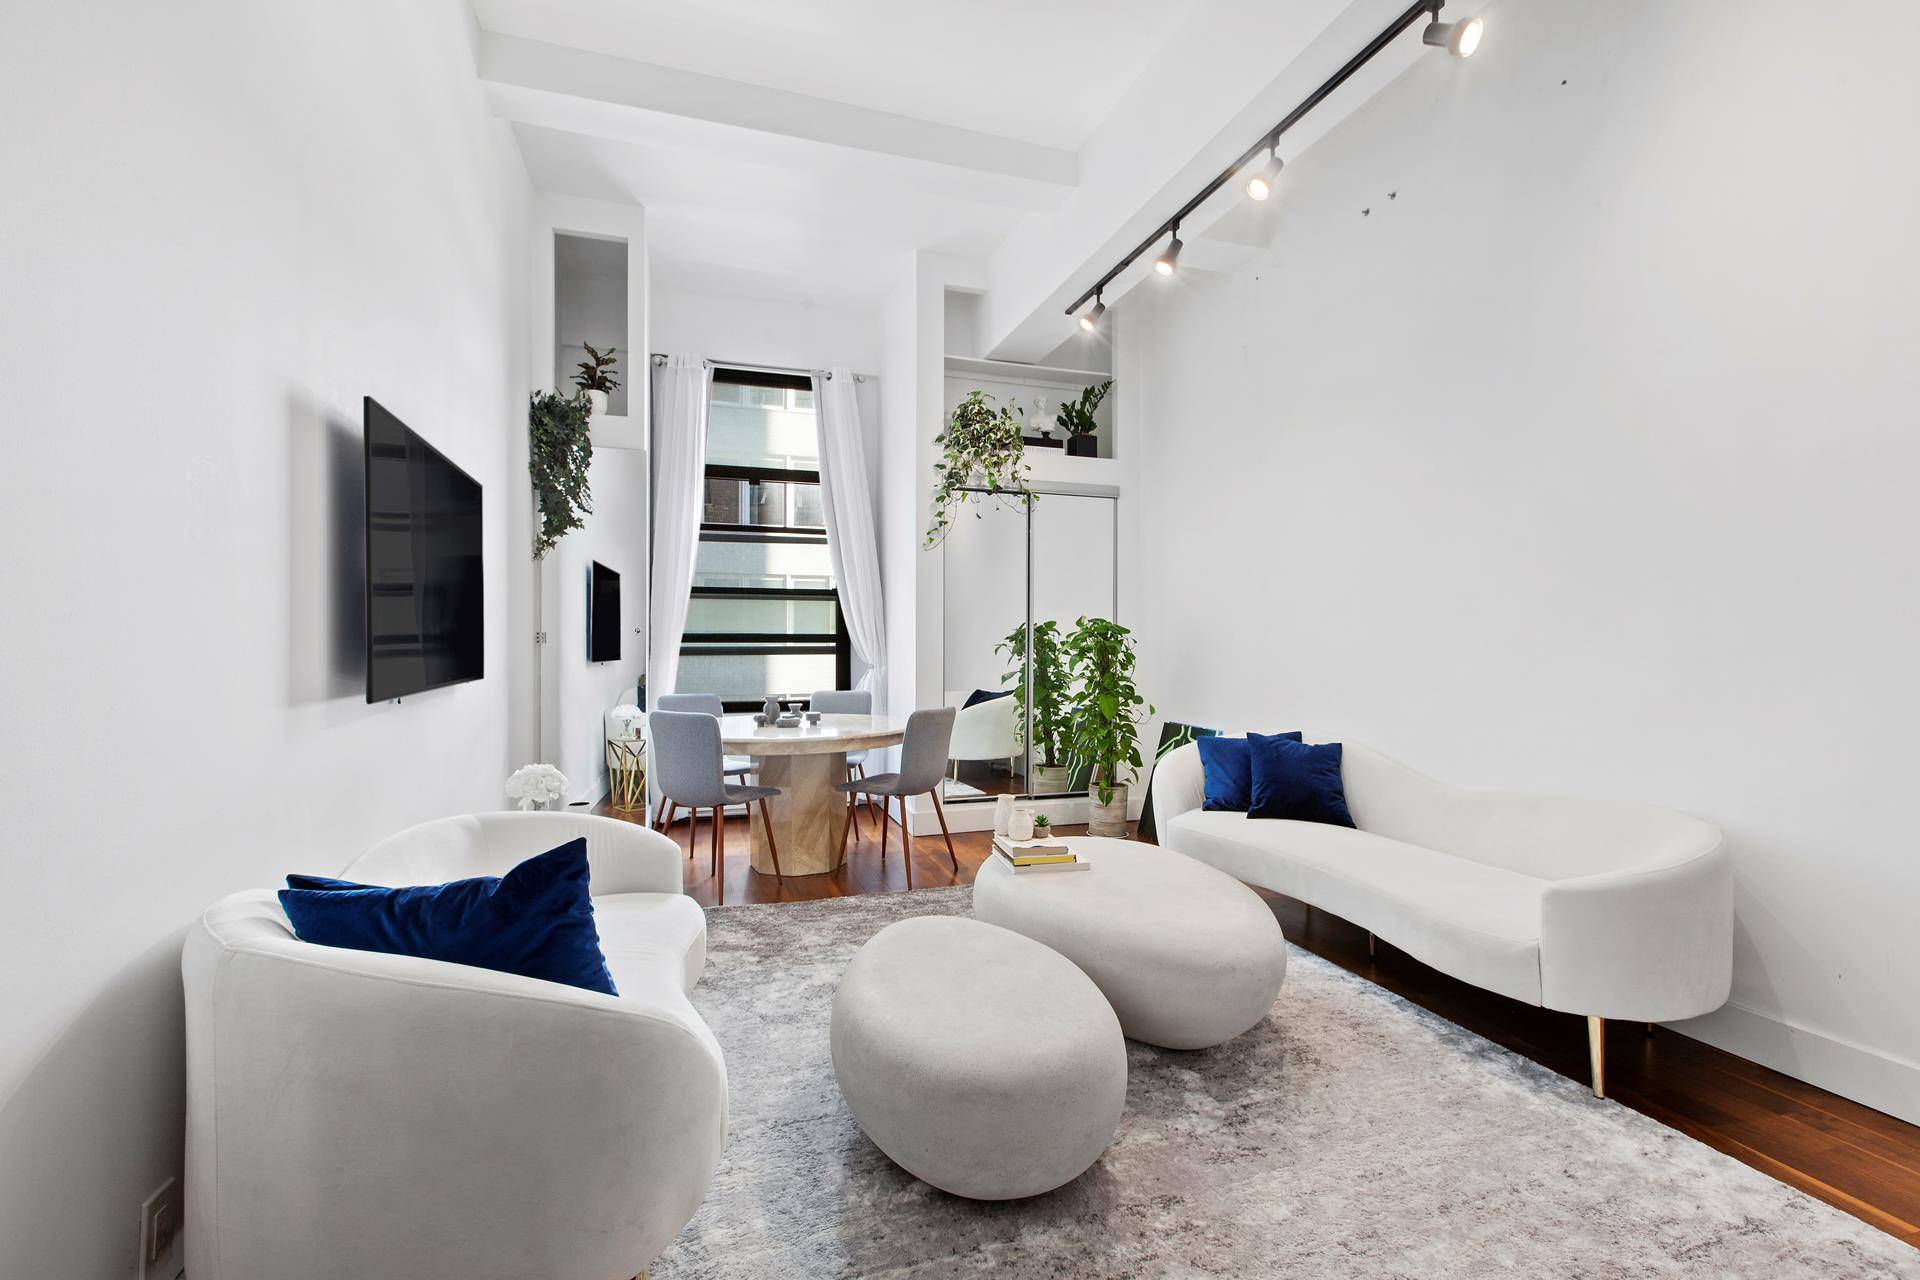 Welcome to 244 Madison Avenue Unit 5D.